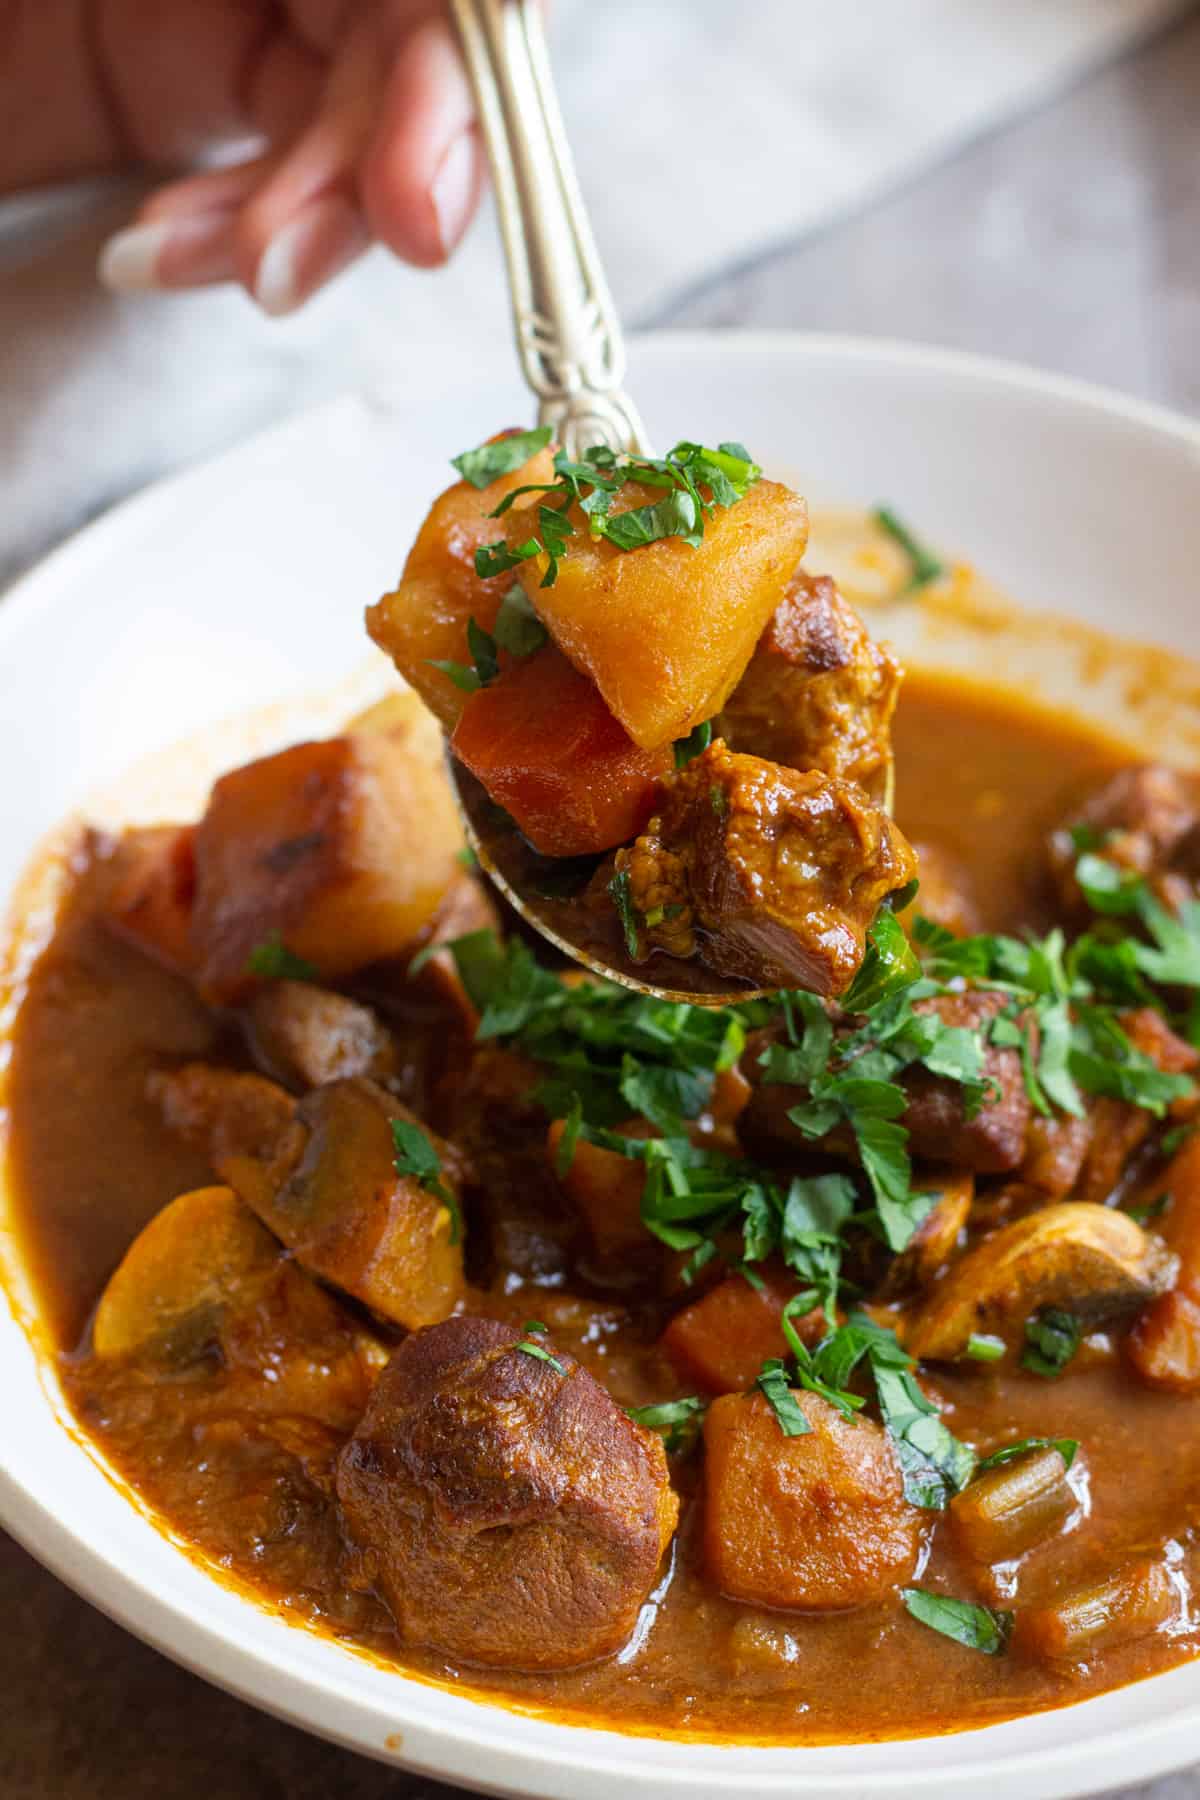 This easy lamb stew recipe is filled with healthy and tasty ingredients. It's a one pot stew that's packed with vegetables, lamb and spices.
